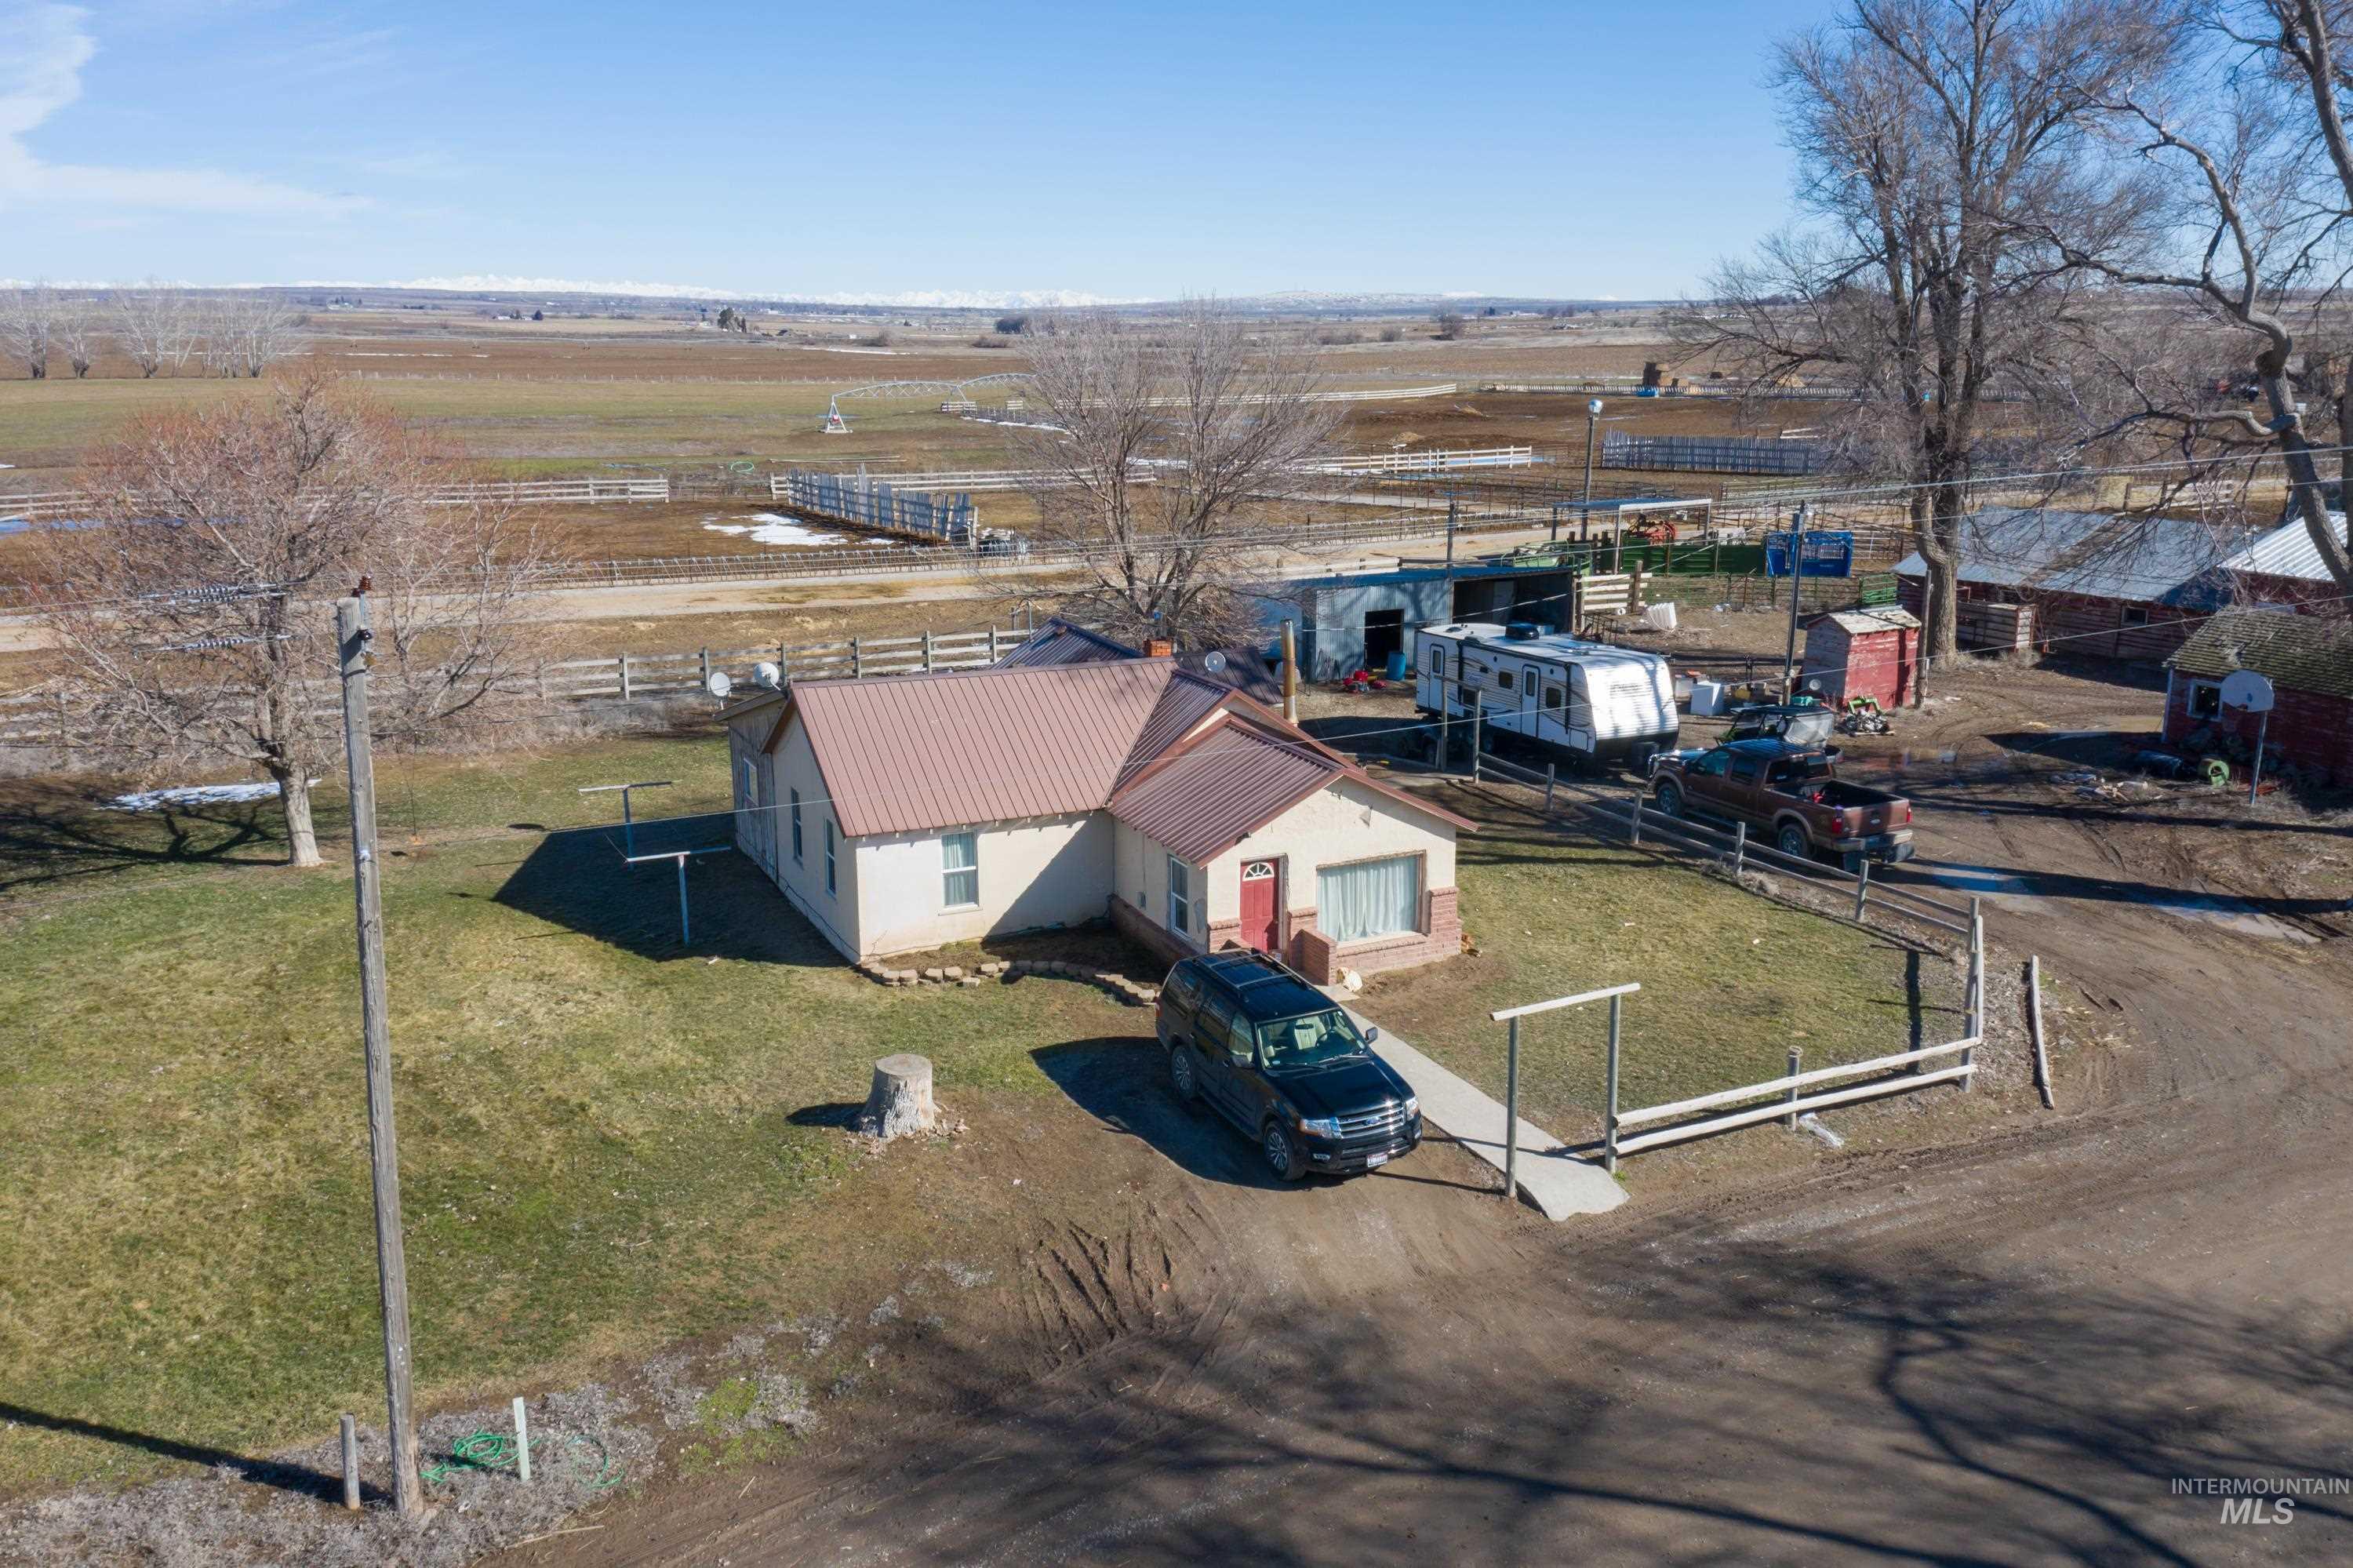 Approx. 585 E 570 S, Dietrich, Idaho 83324, 4 Bedrooms, 1.5 Bathrooms, Farm & Ranch For Sale, Price $1,400,000,MLS 98903823